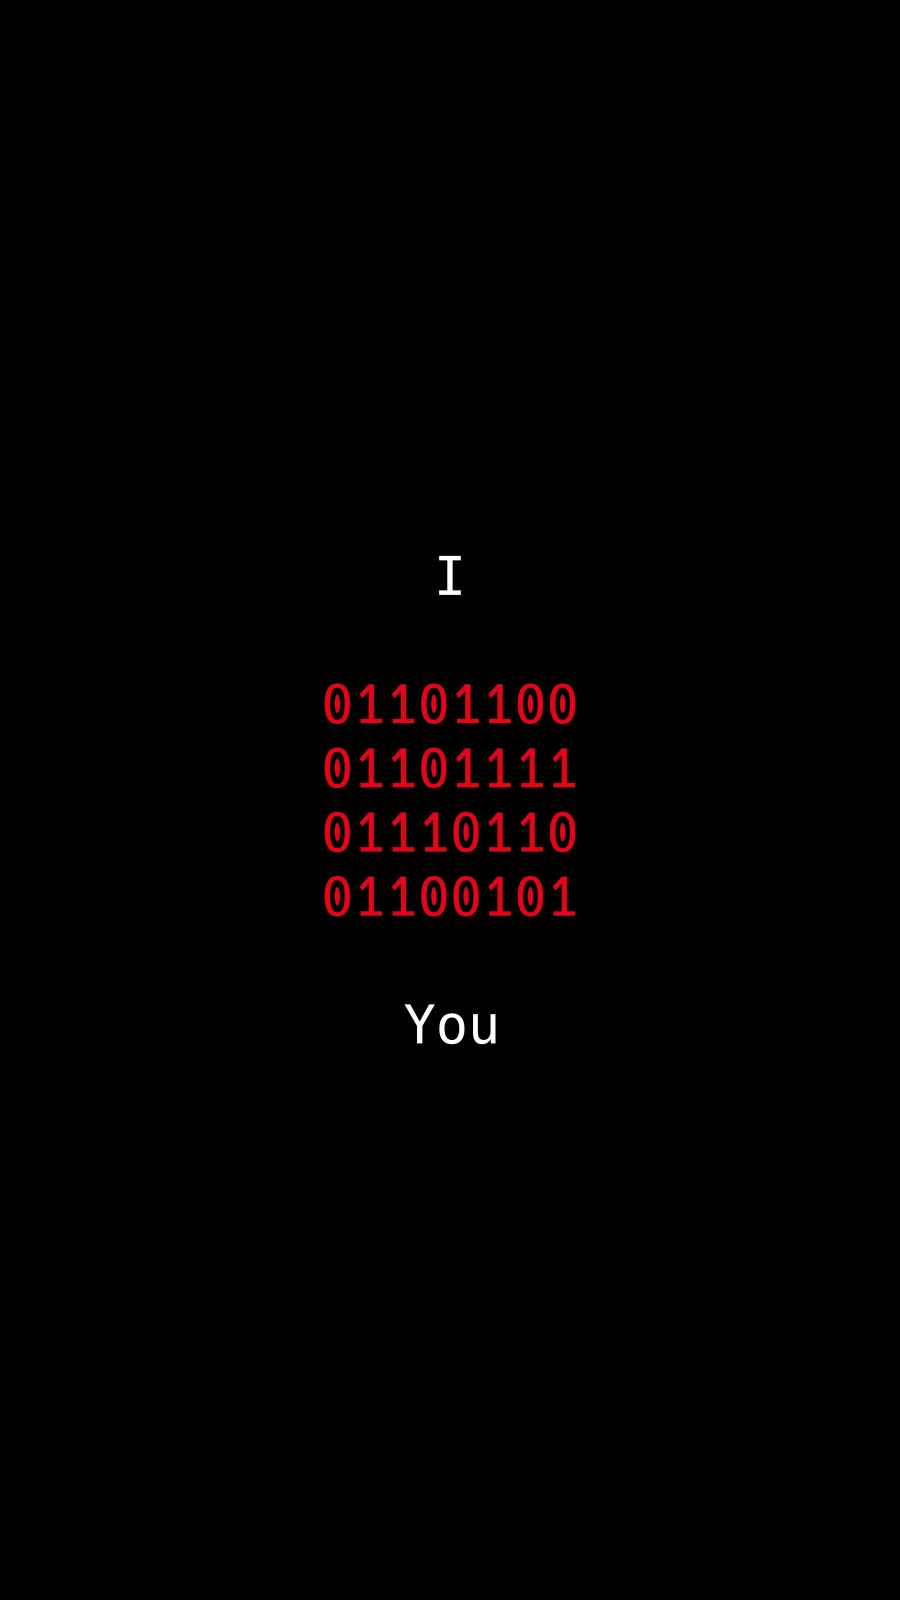 Love Binary Code - IPhone Wallpapers : iPhone Wallpapers